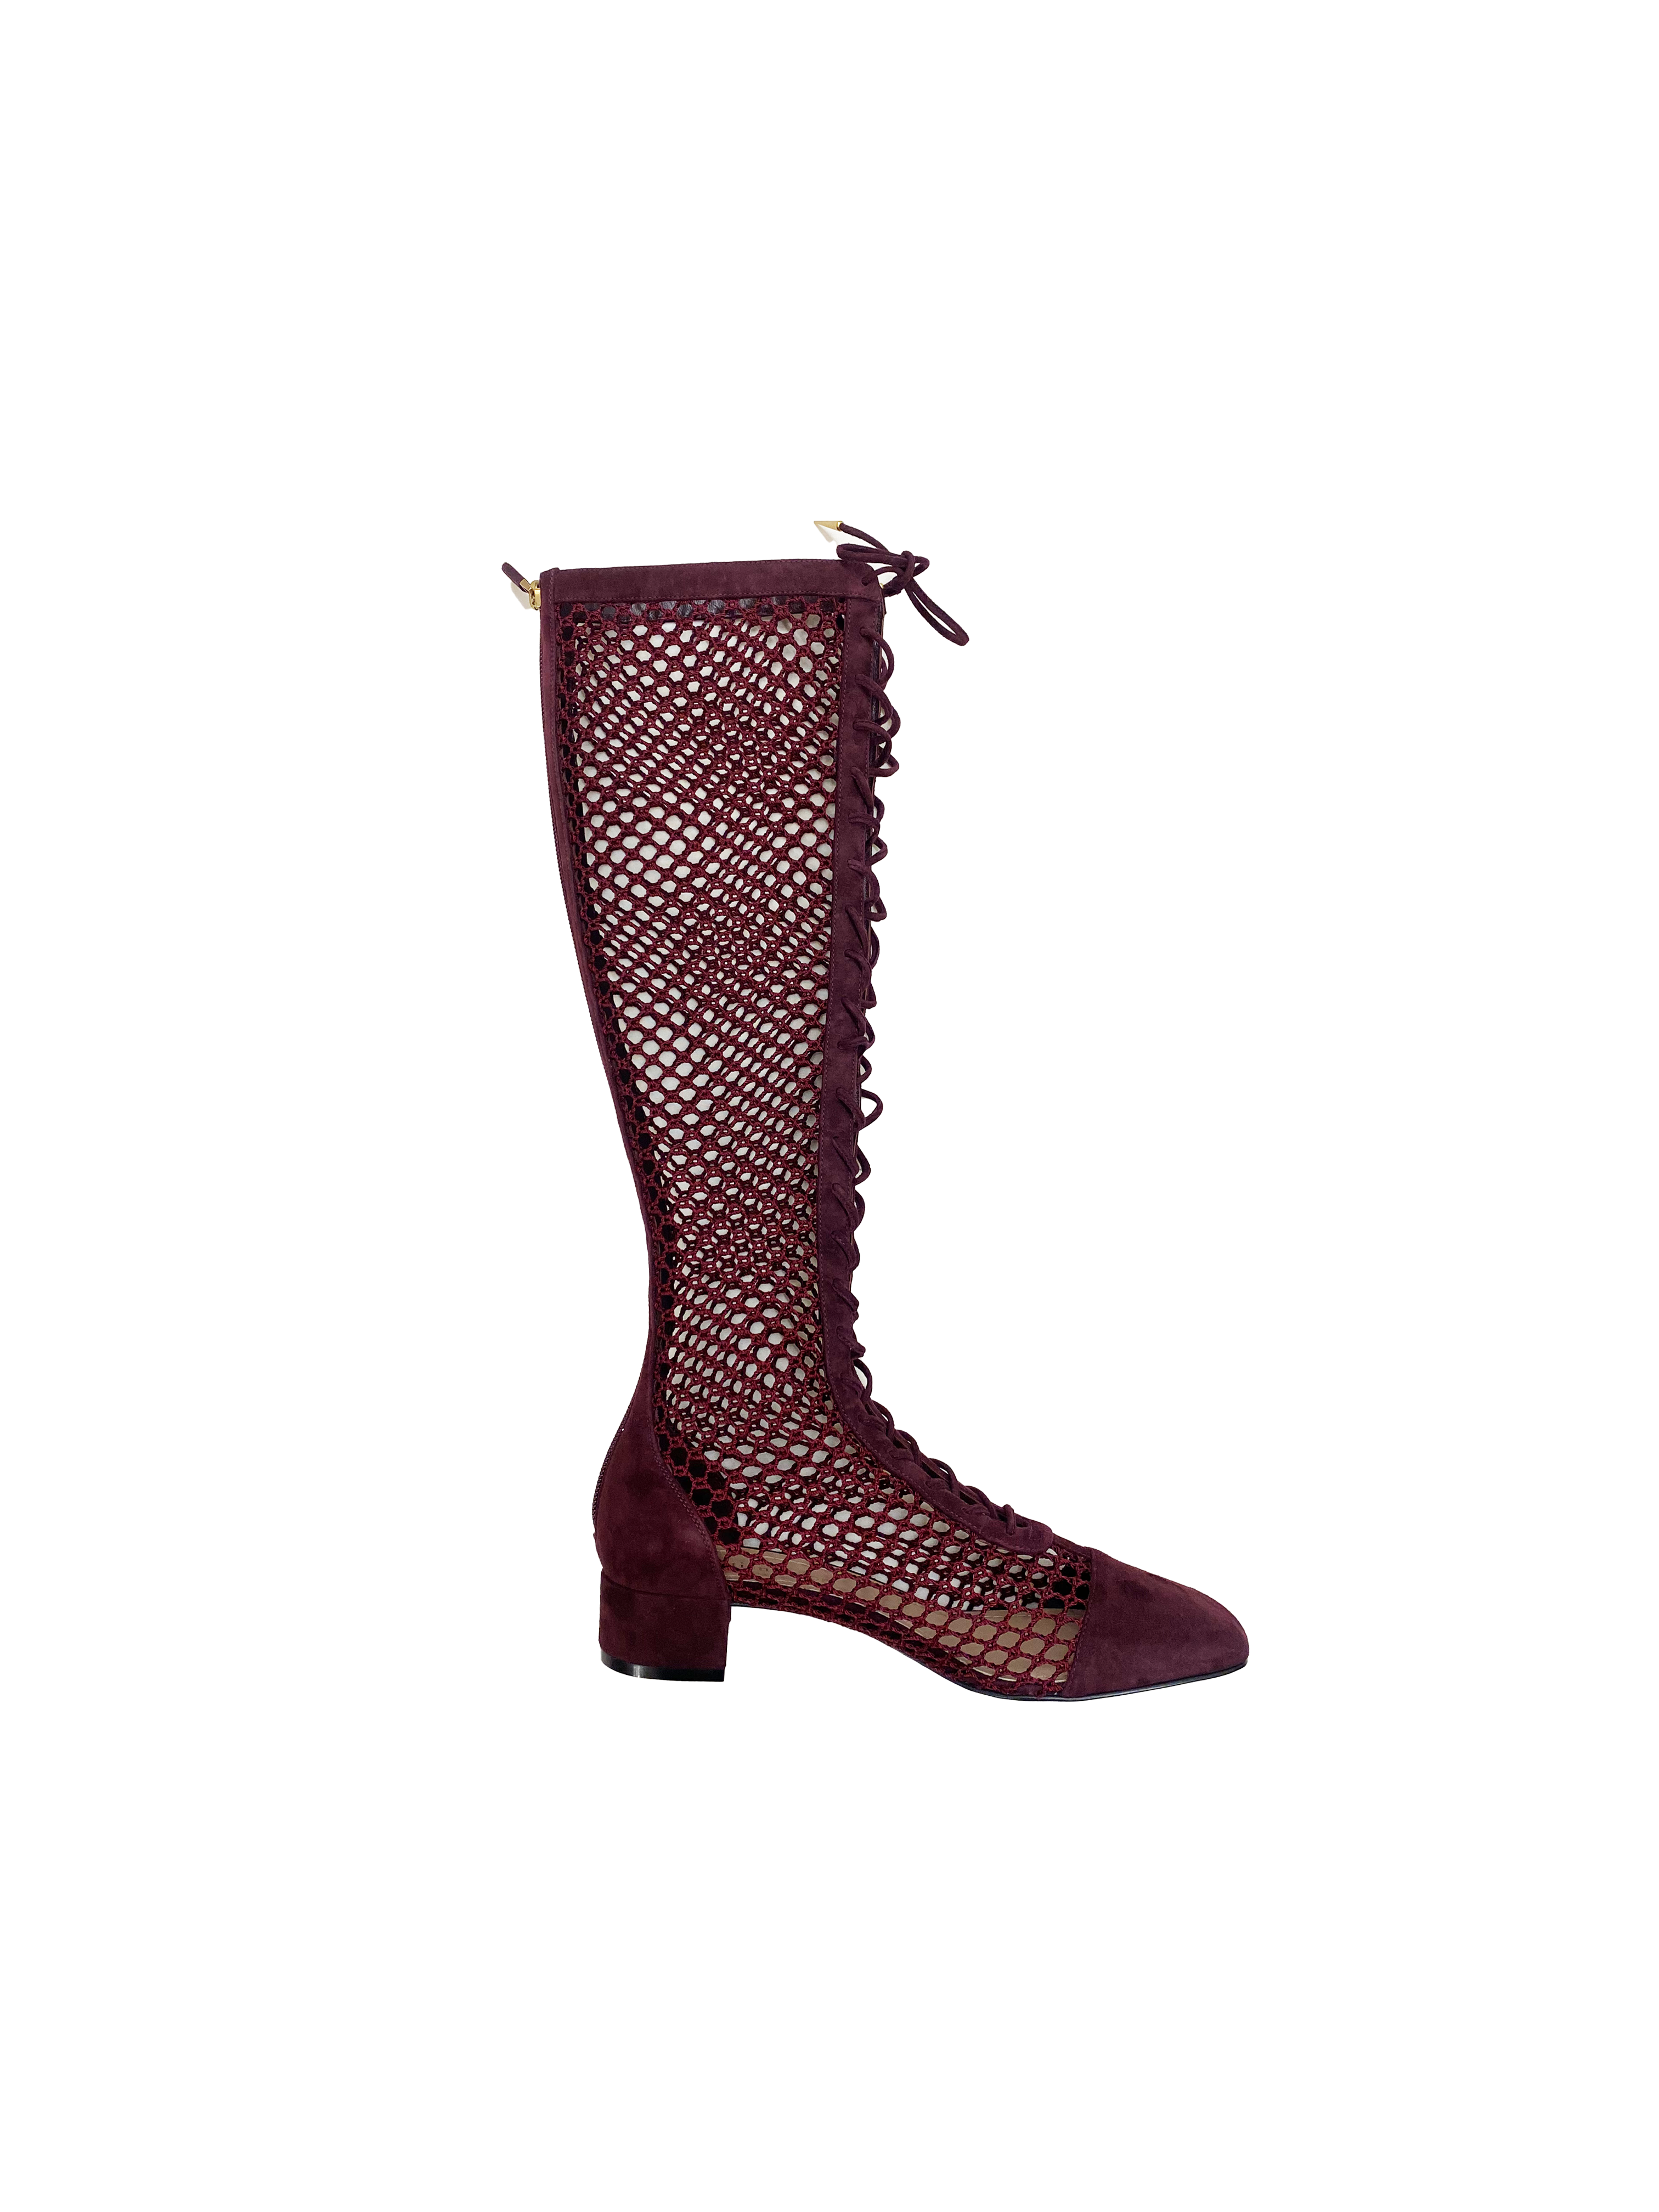 Christian Dior SS 2018 Maroon Naughtily-D Boots